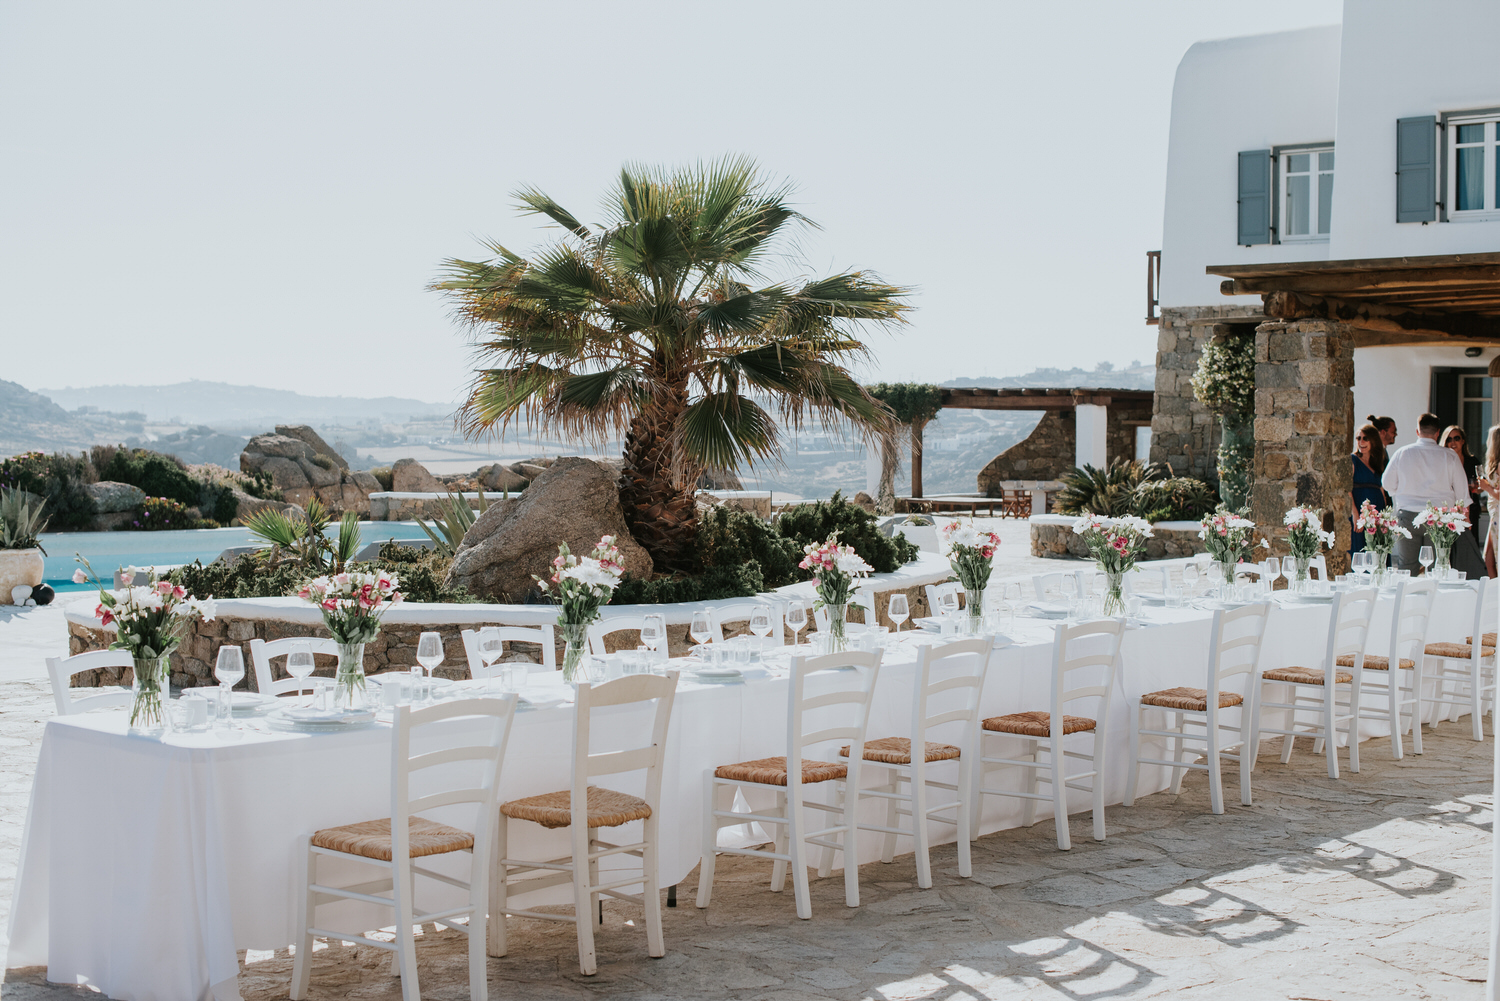 Mykonos wedding photographer: panoramic photo of long reception table setup in the afternoon light with flower arrangements, villa and guests in the background.